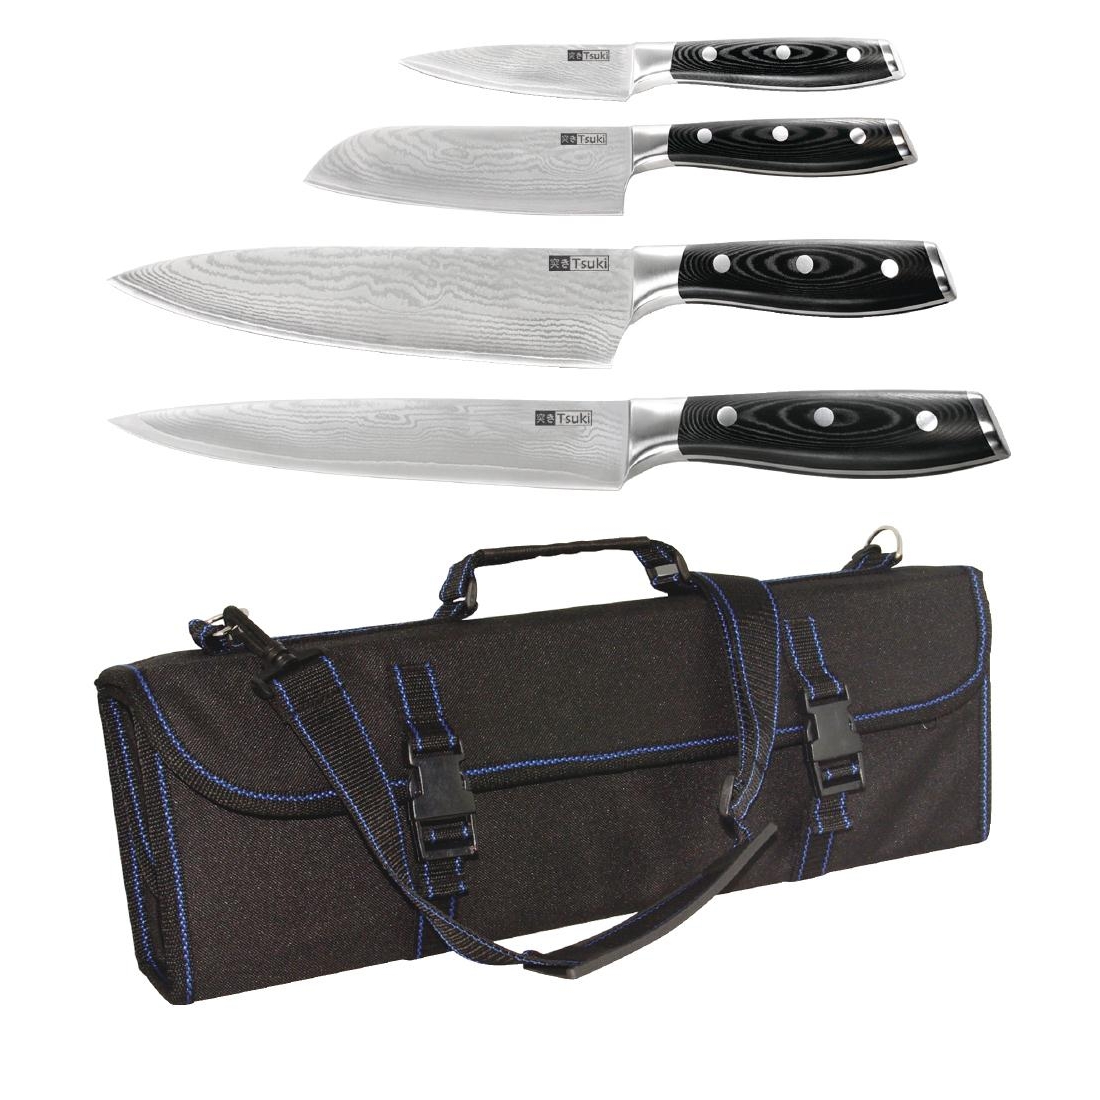 SPECIAL OFFER Tsuki 4 Piece Knife Set and Case